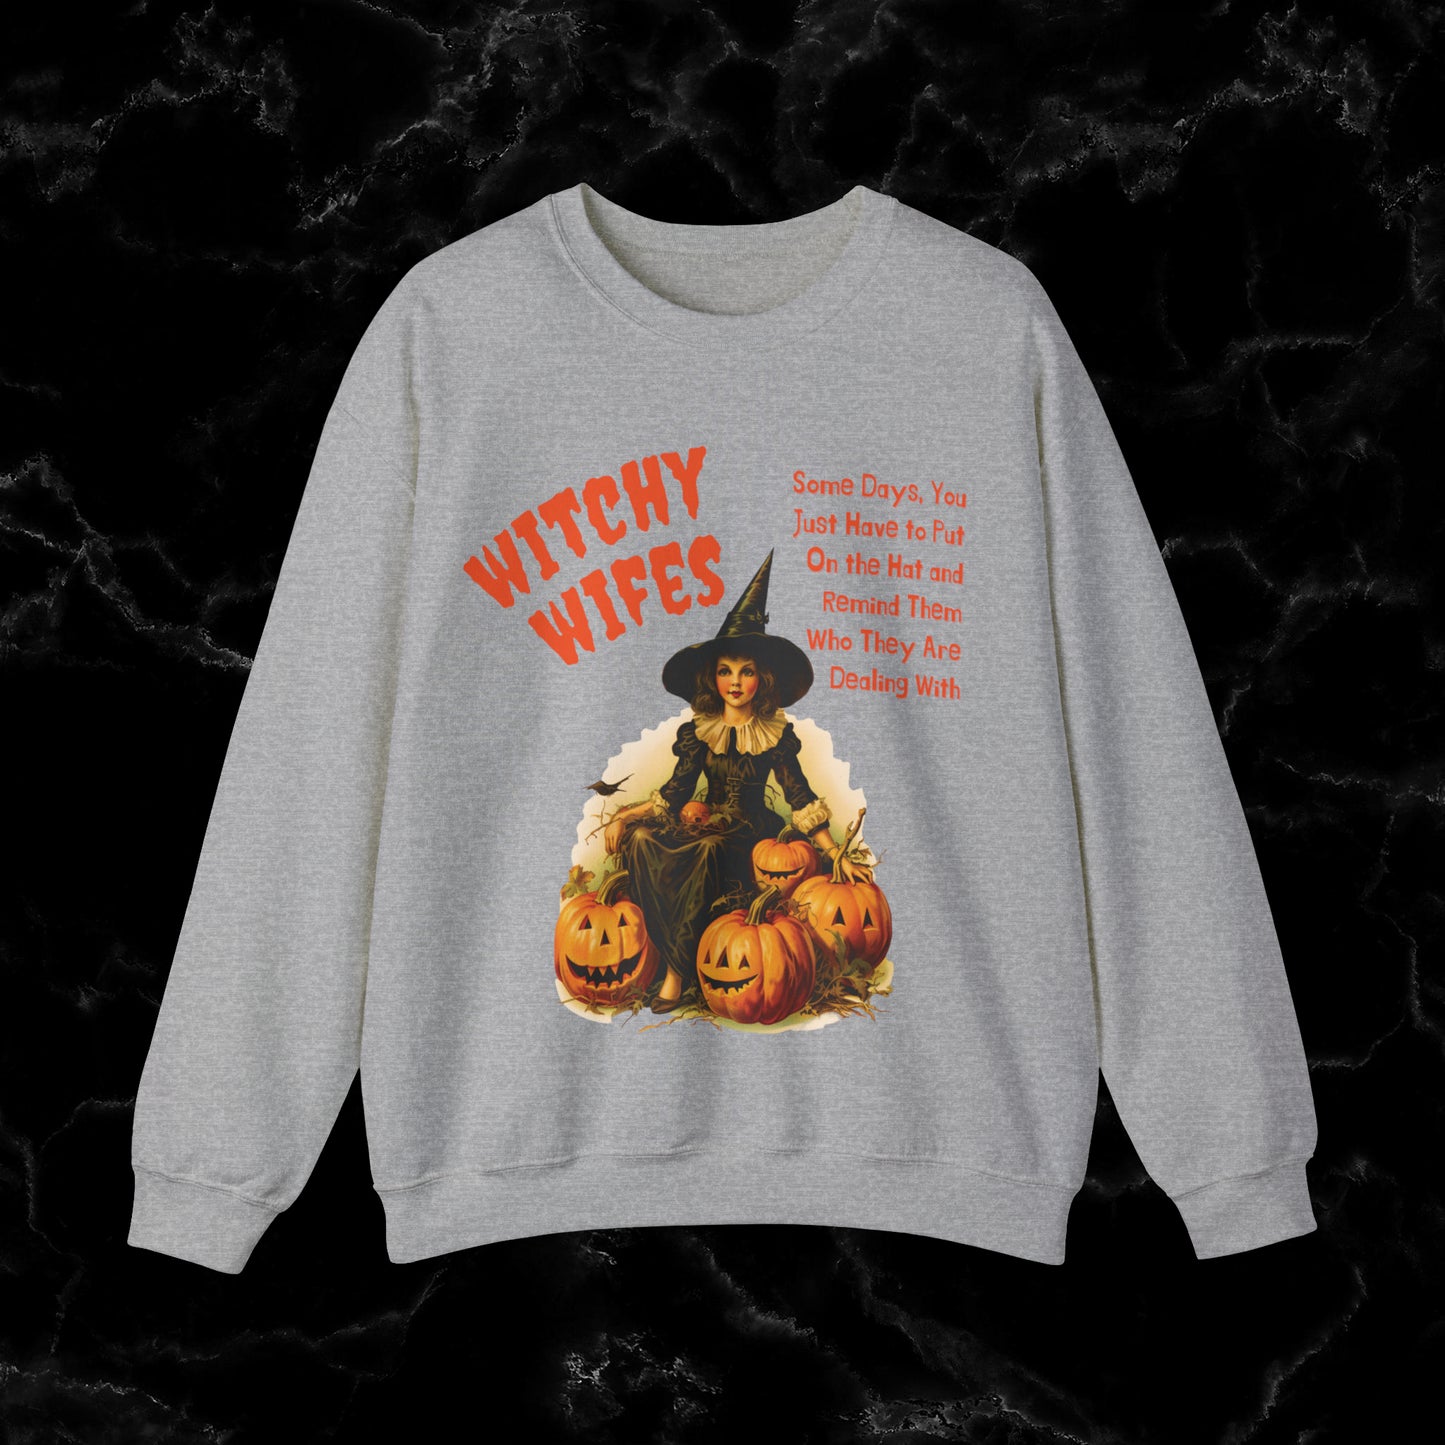 Embrace the Witchy Vibes with Witch Quote Halloween Sweatshirt - Perfect for Wifes Sweatshirt S Sport Grey 